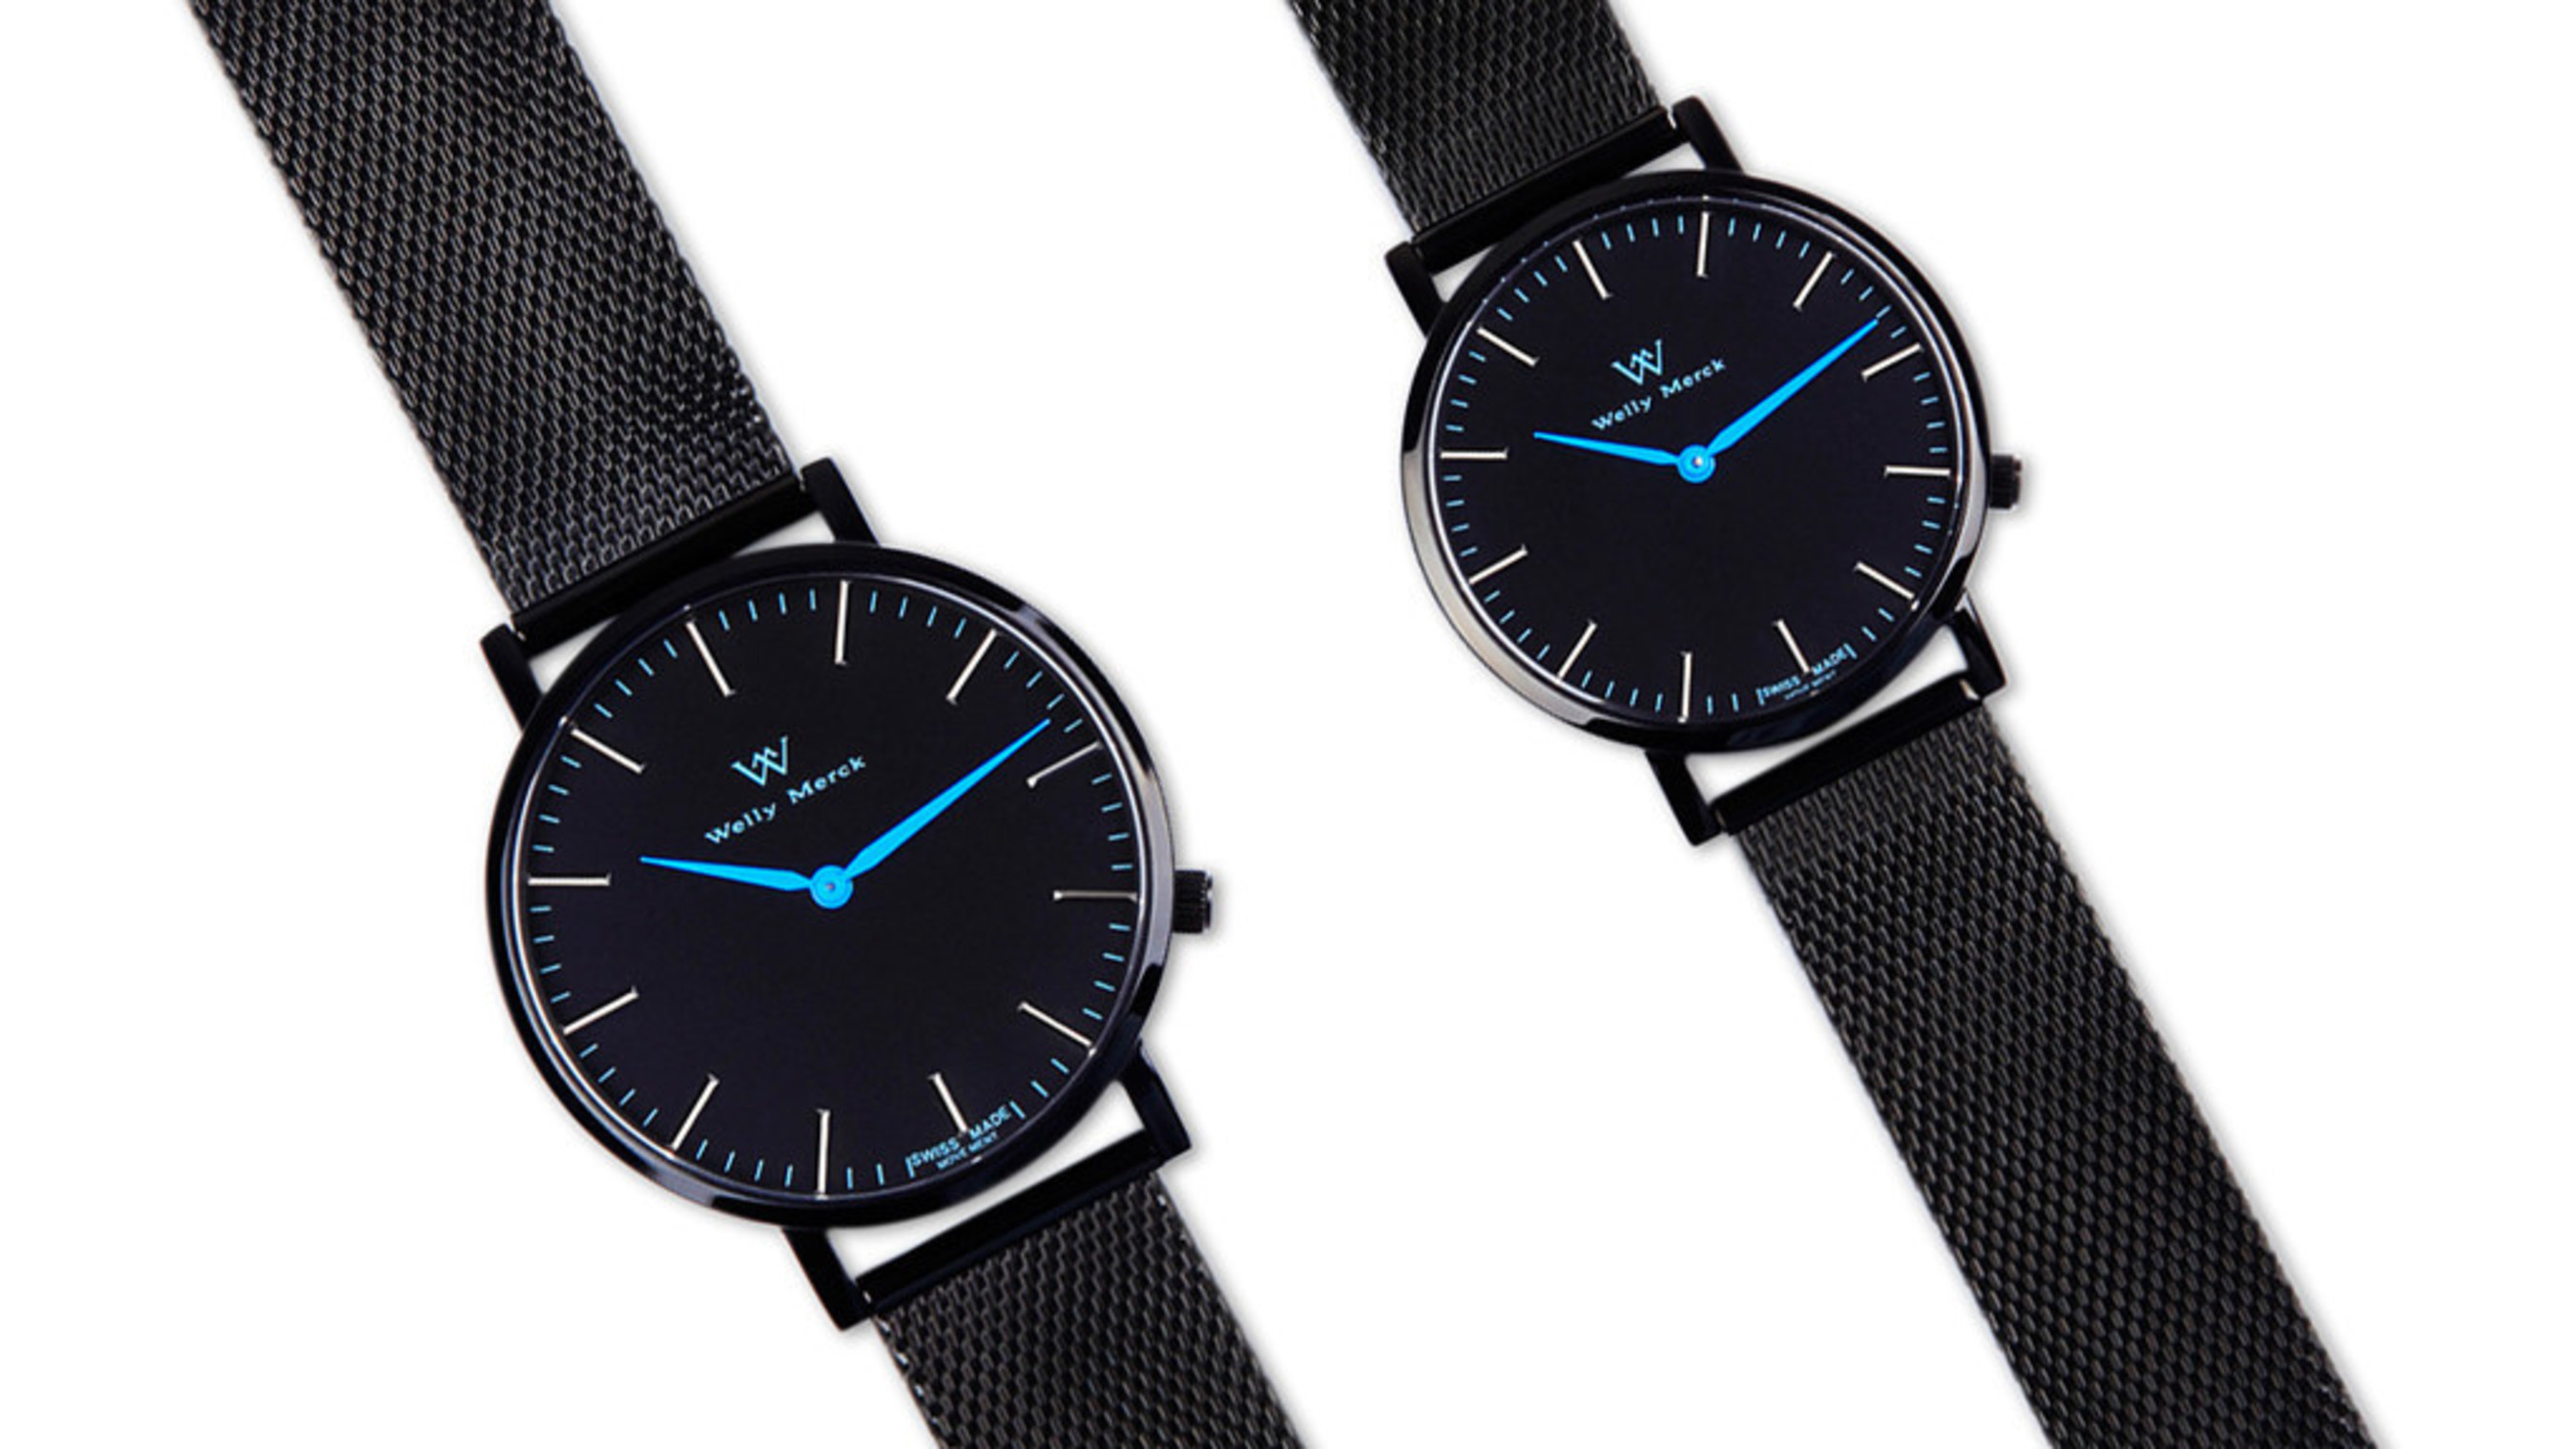 Welly Merck Announces the Launch of Their Swiss-Designed, Modern Fashion Watch Collection That Breaks Down Cost Barriers Between Makers and Consumers